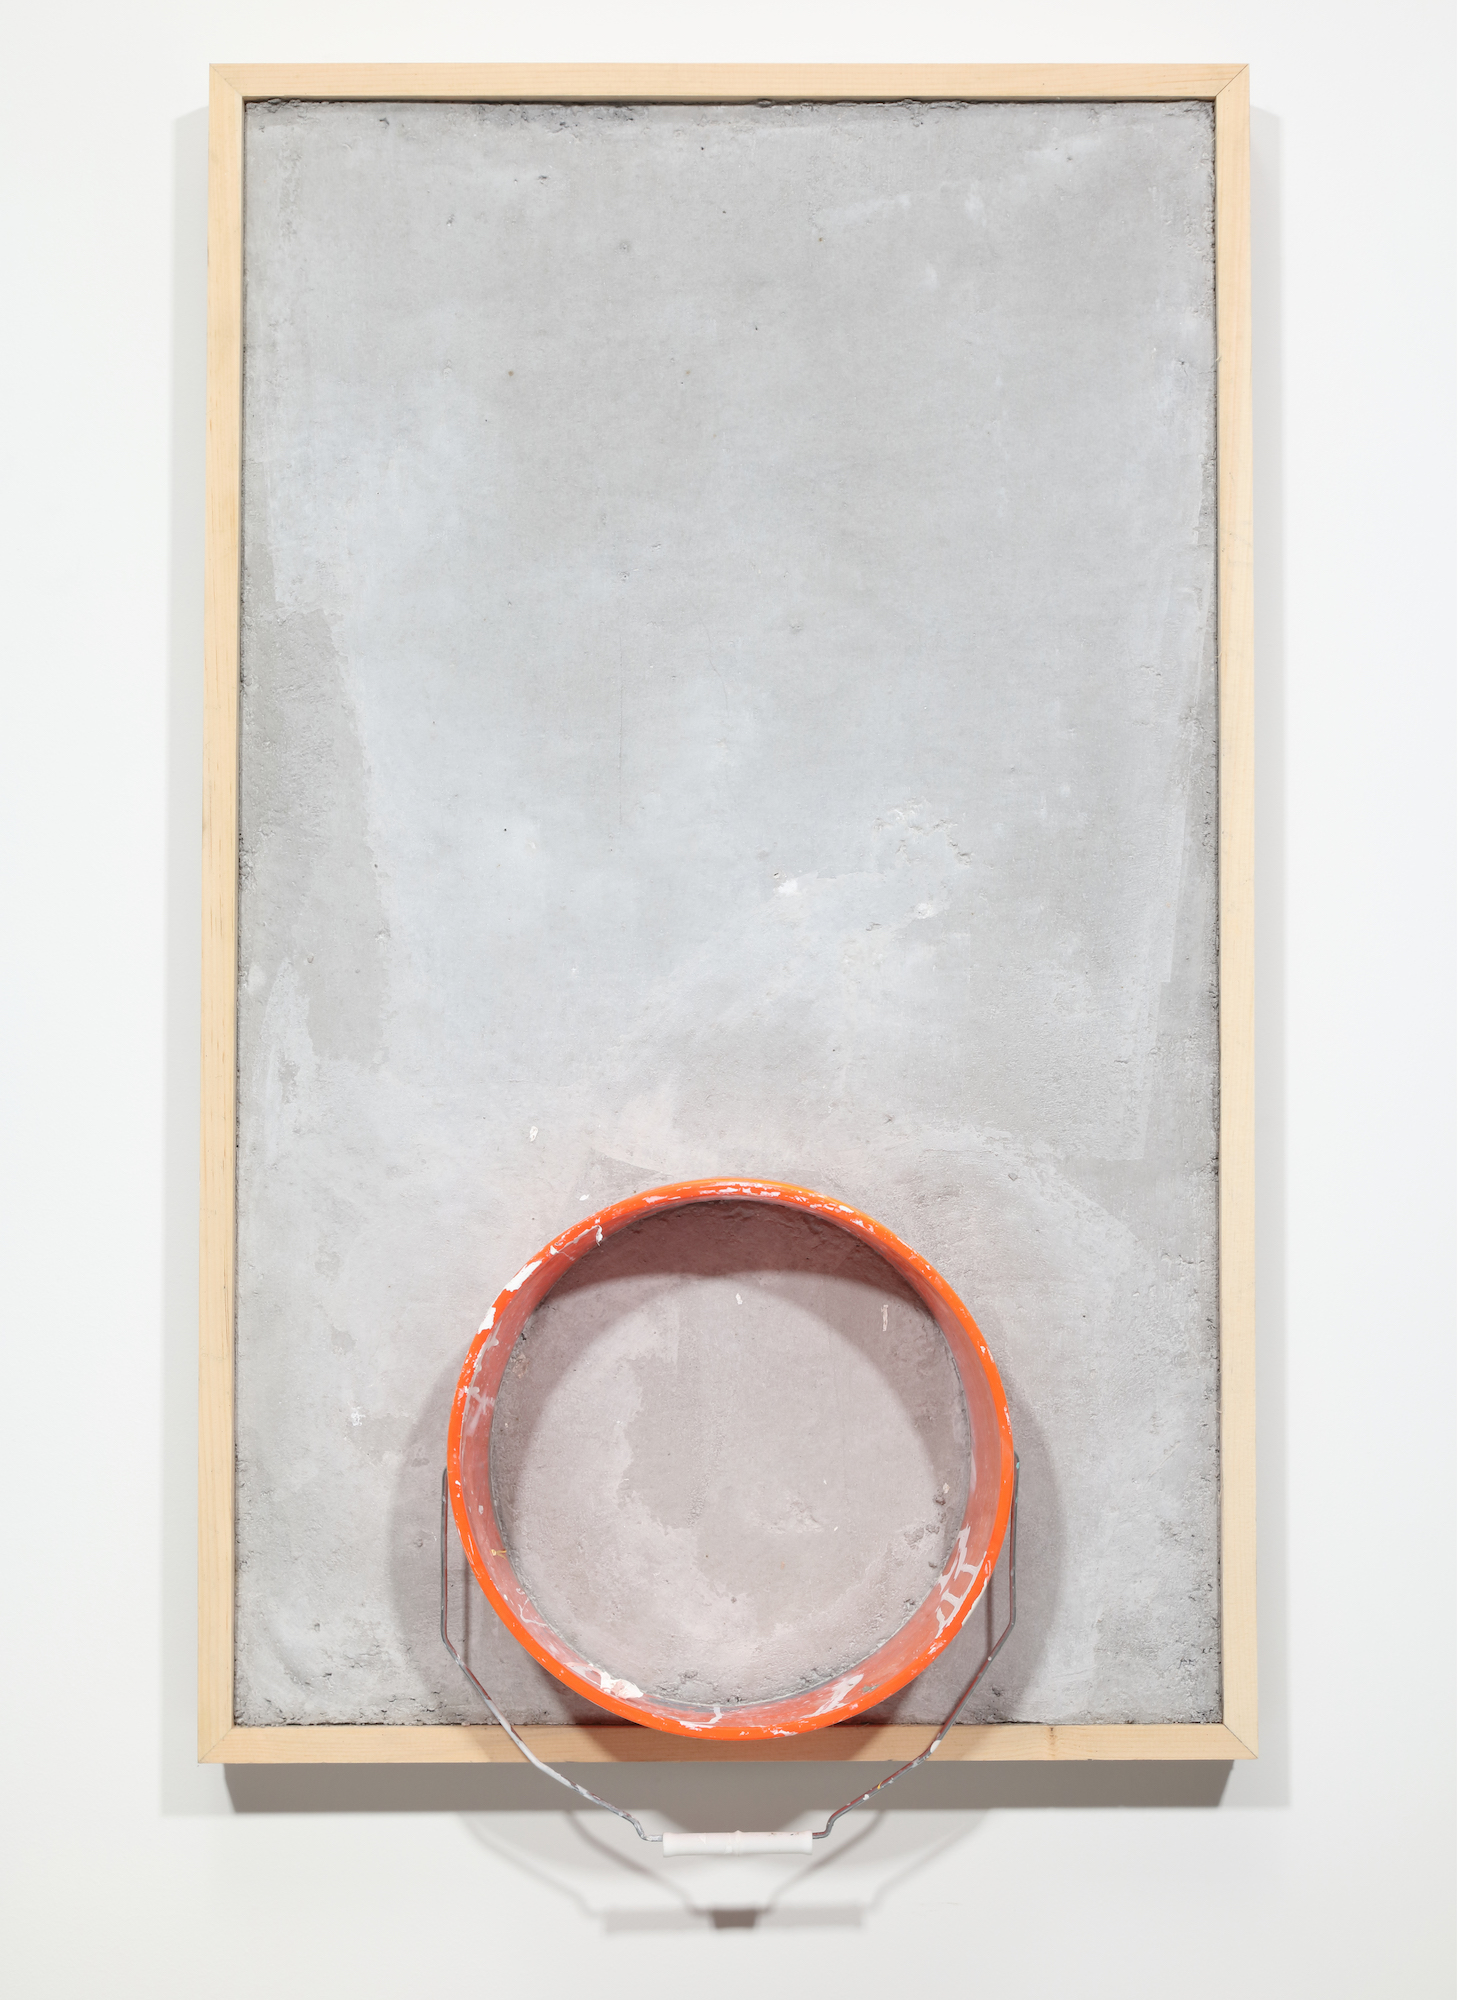 A rectangular gray concrete slab hung vertically with an orange circle of a bucket centered and embedded at the bottom.